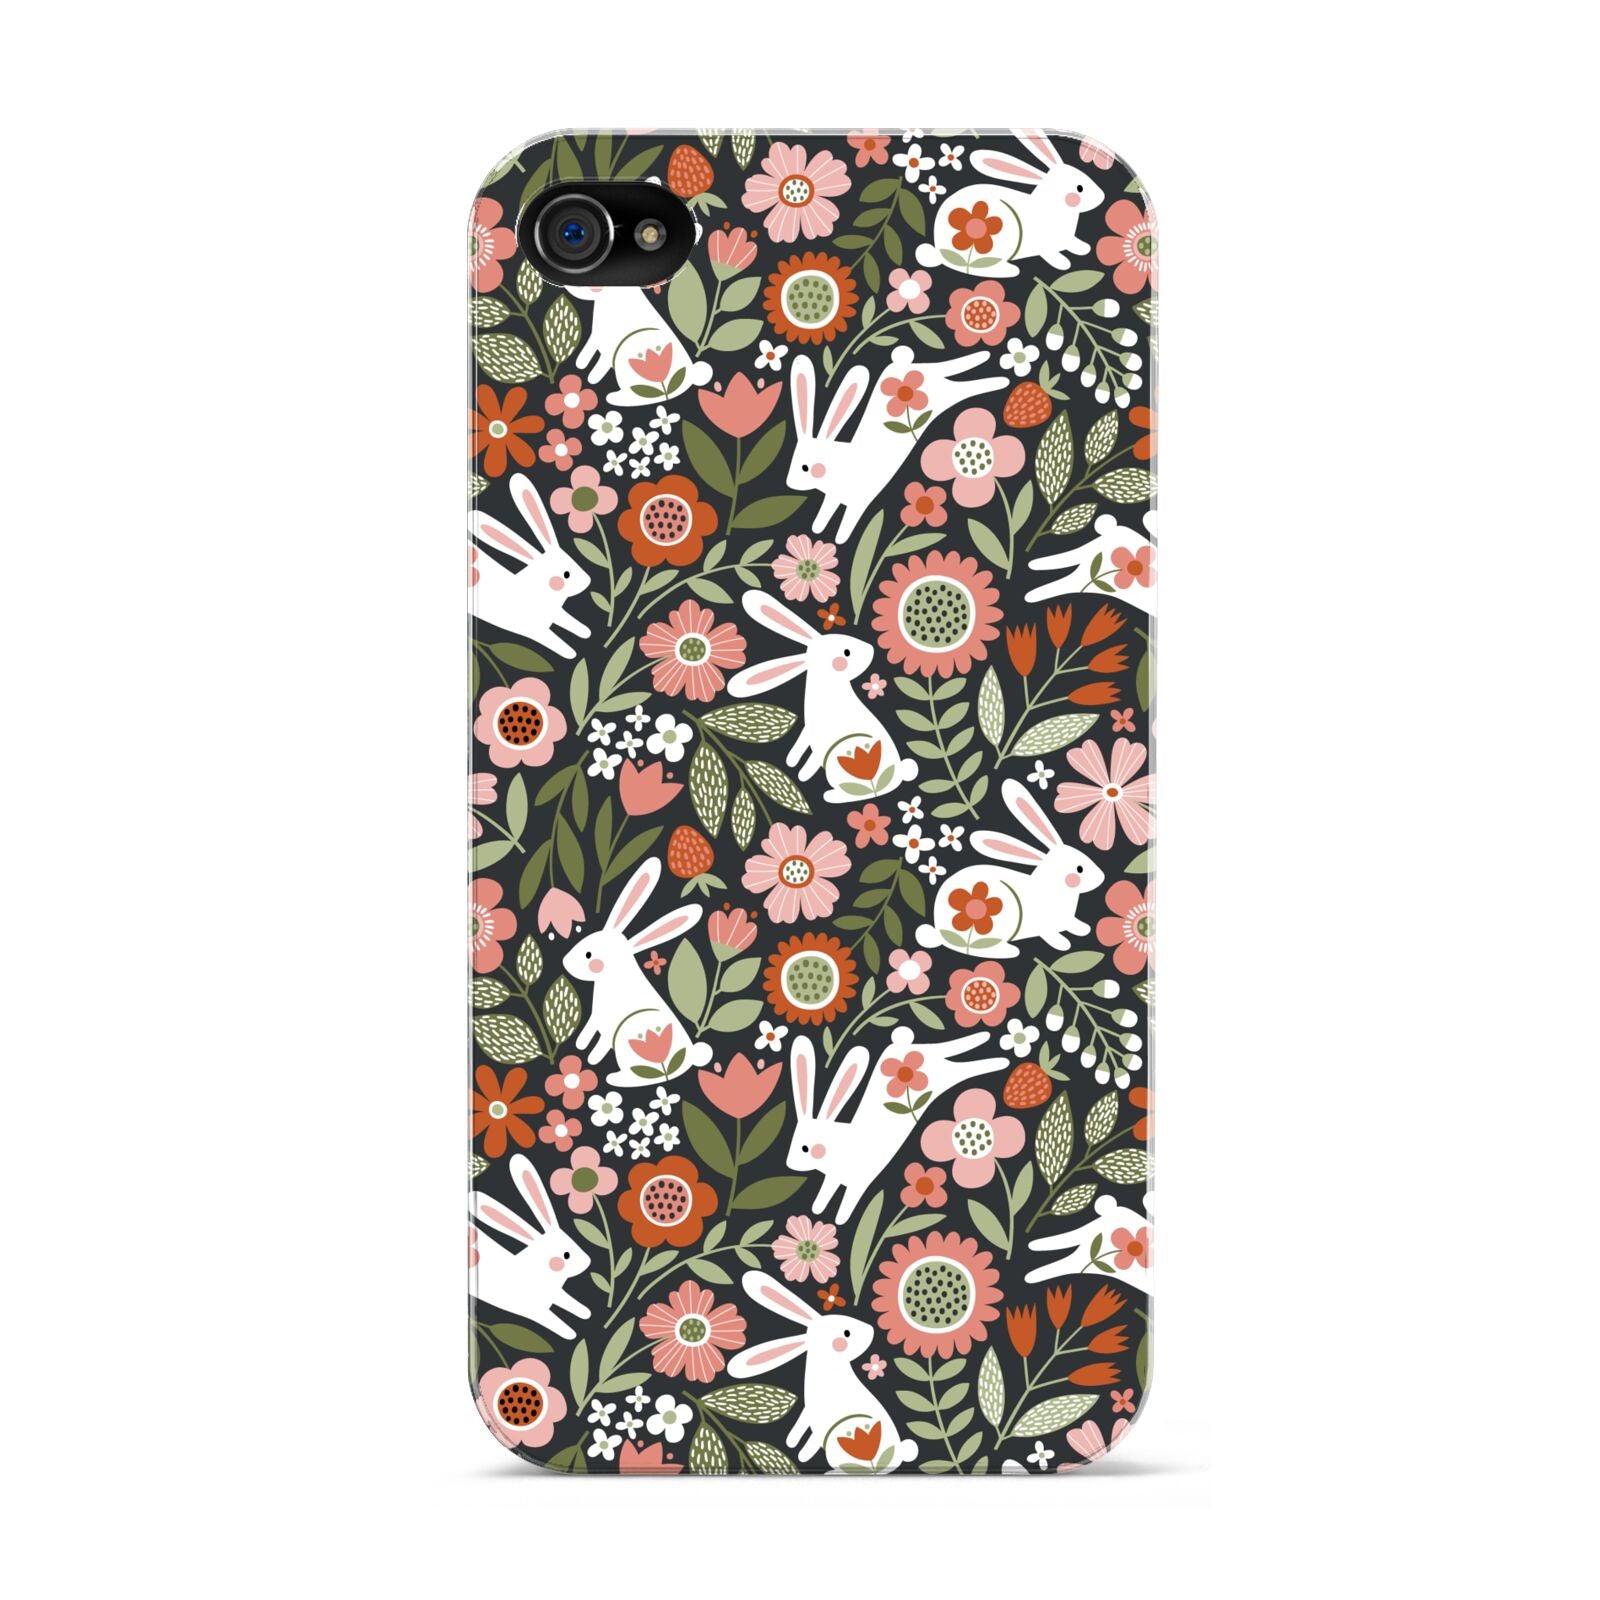 Easter Floral Apple iPhone 4s Case